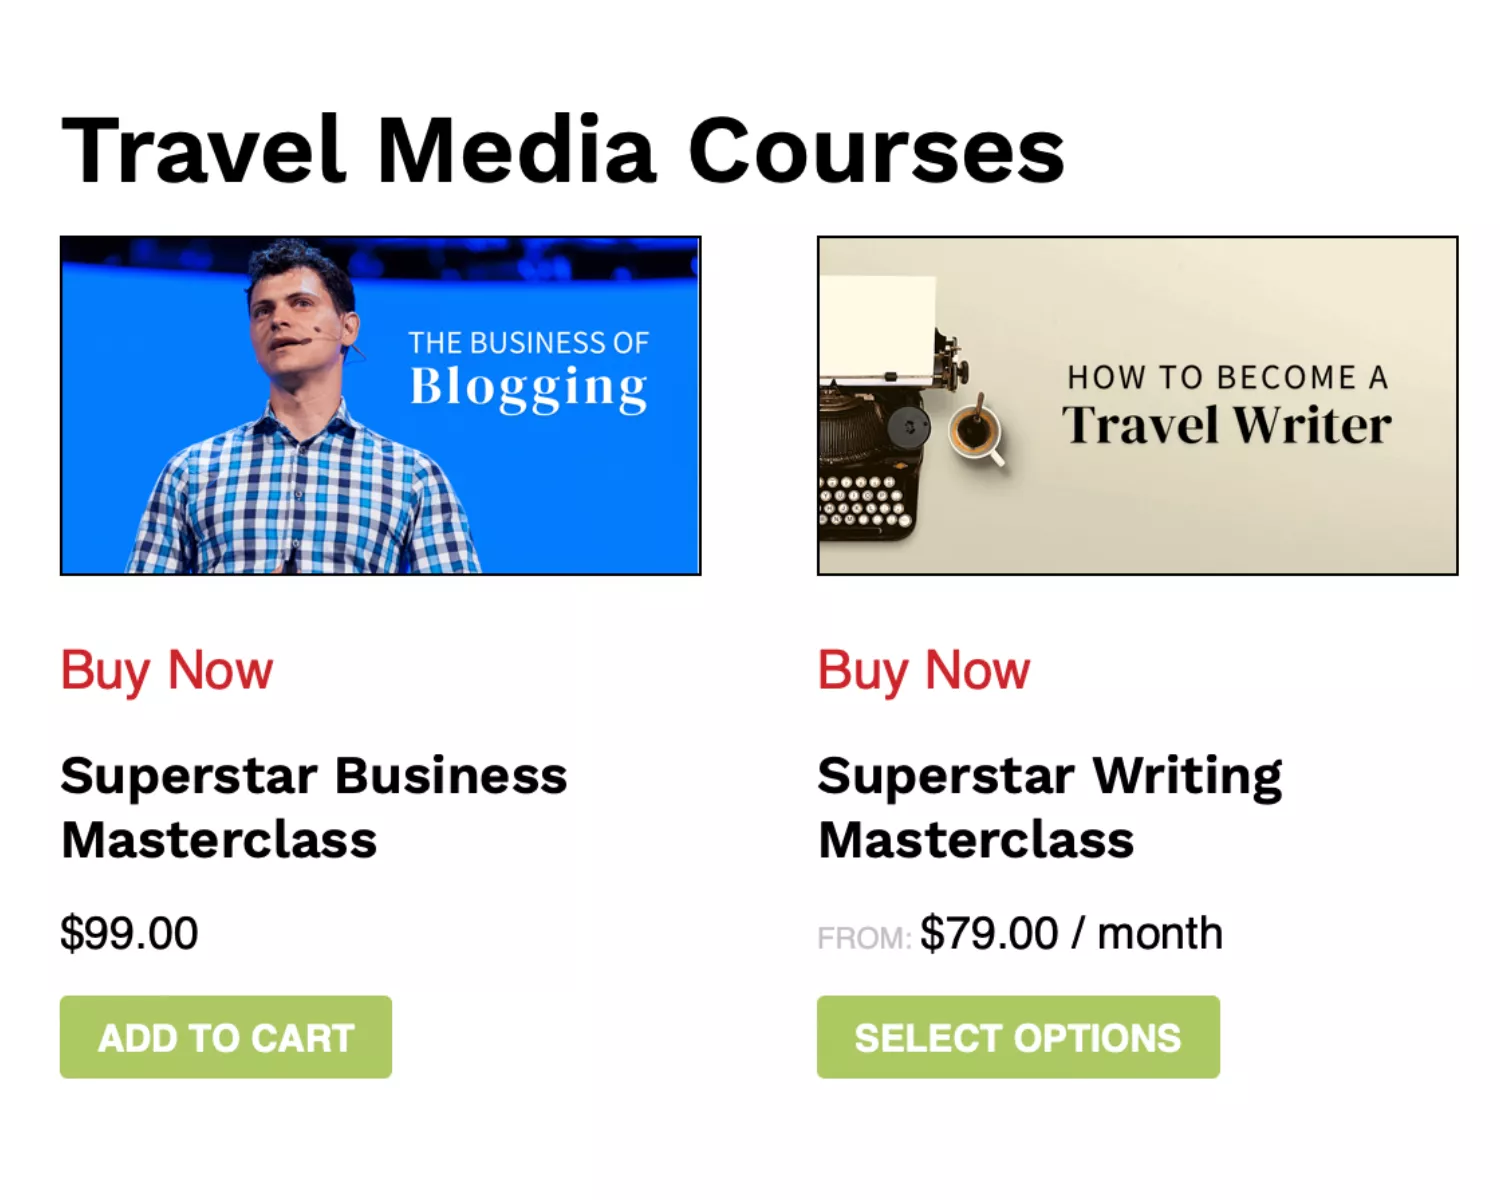 The Superstar Blogging cost